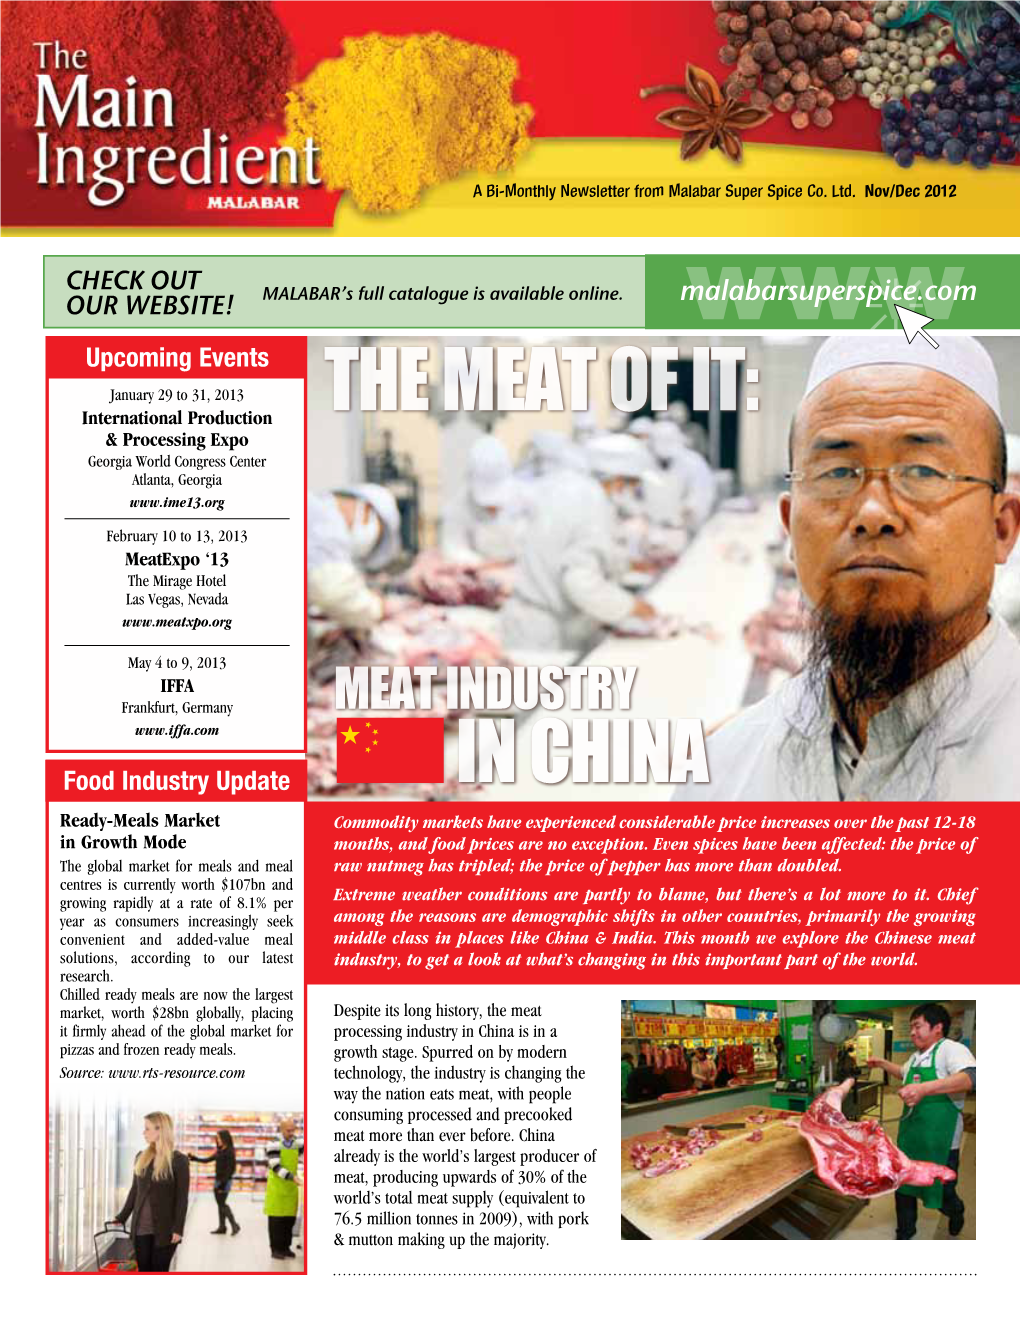 The Meat of It: in China